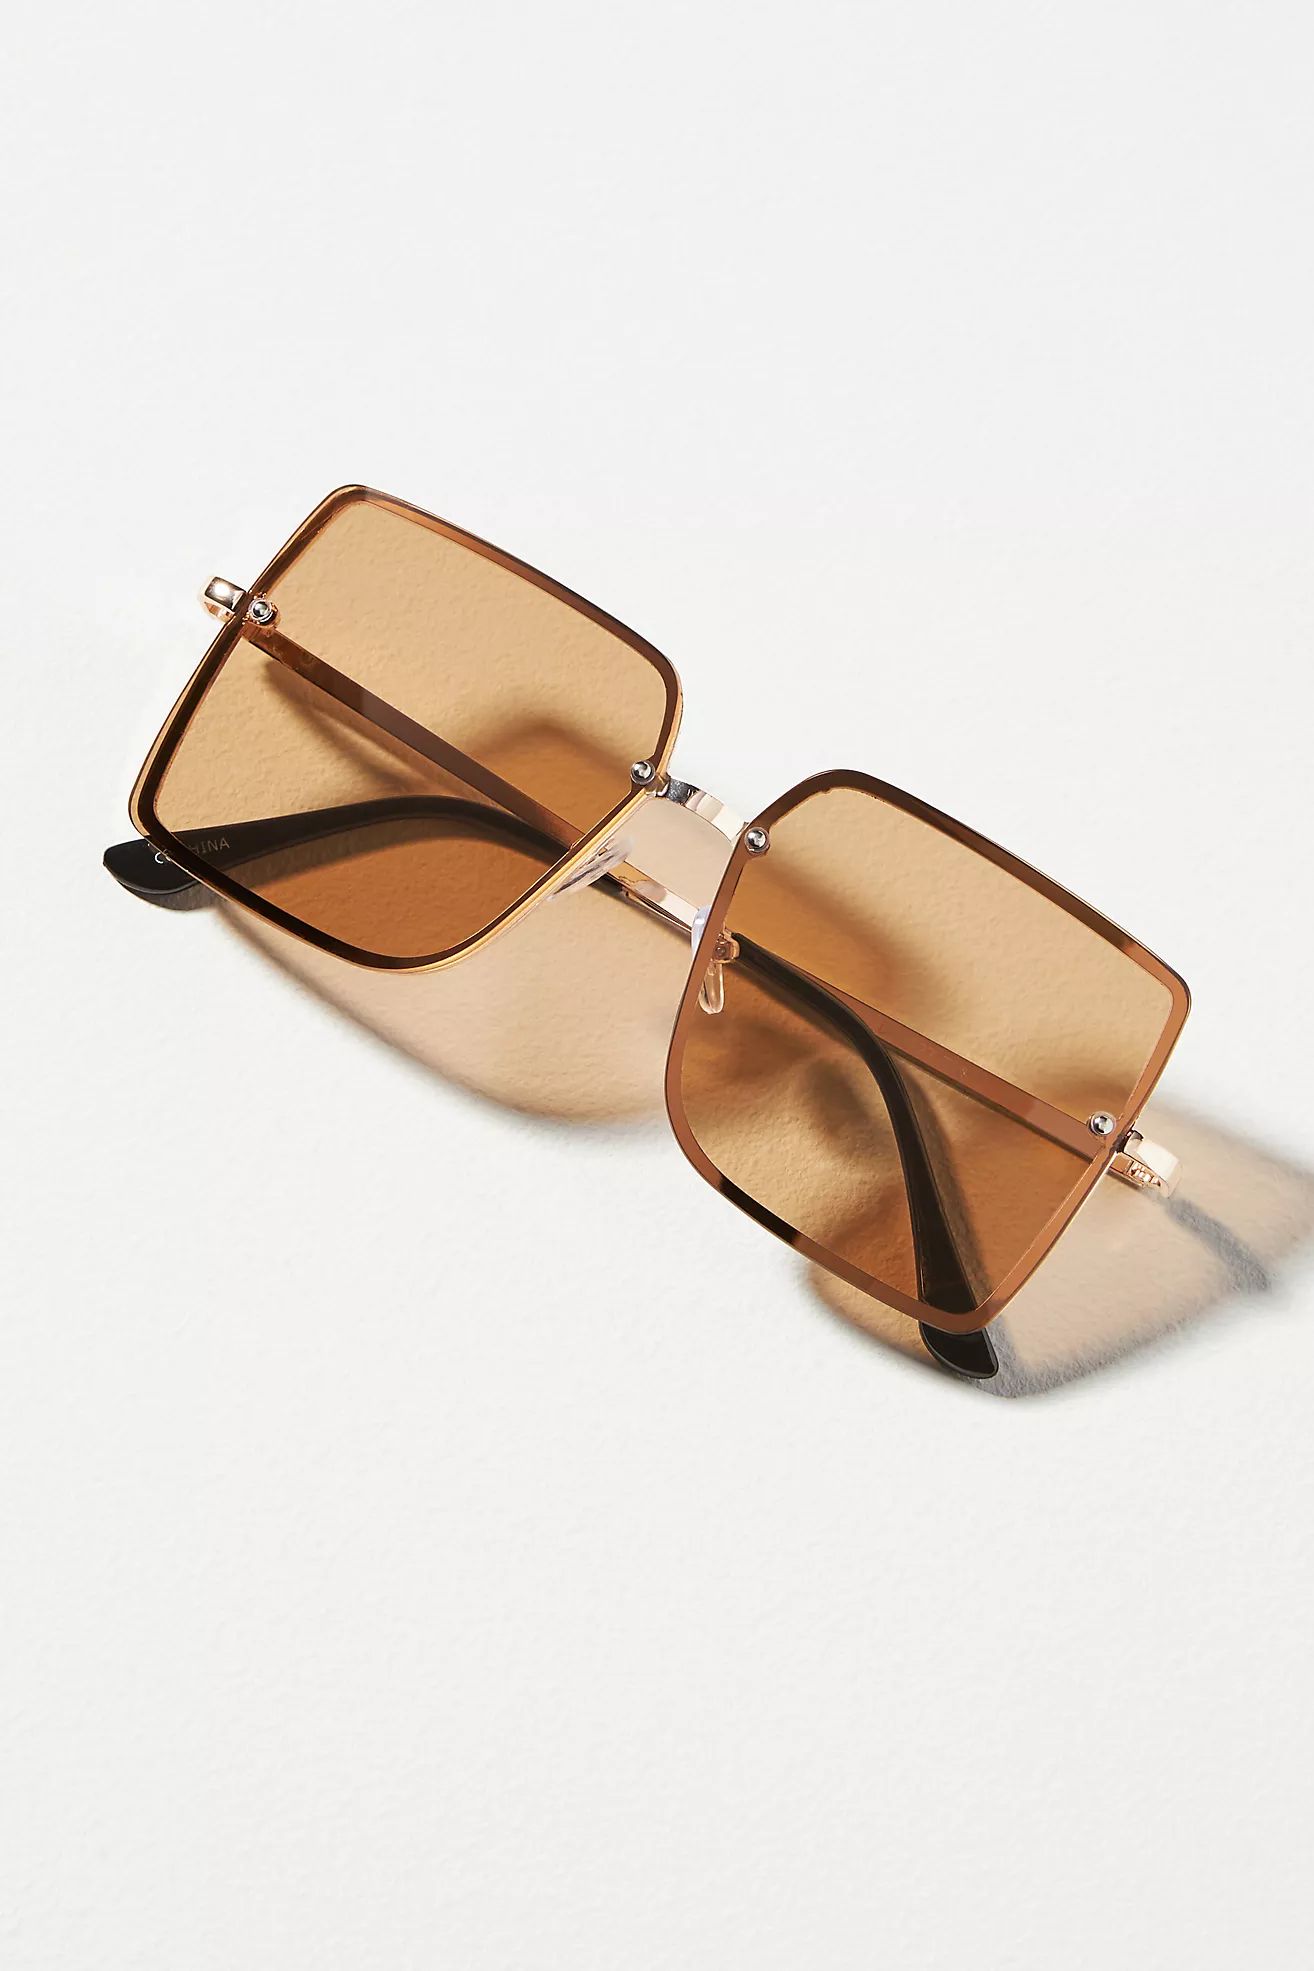 By Anthropologie Square Rimless Sunglasses | Anthropologie (US)